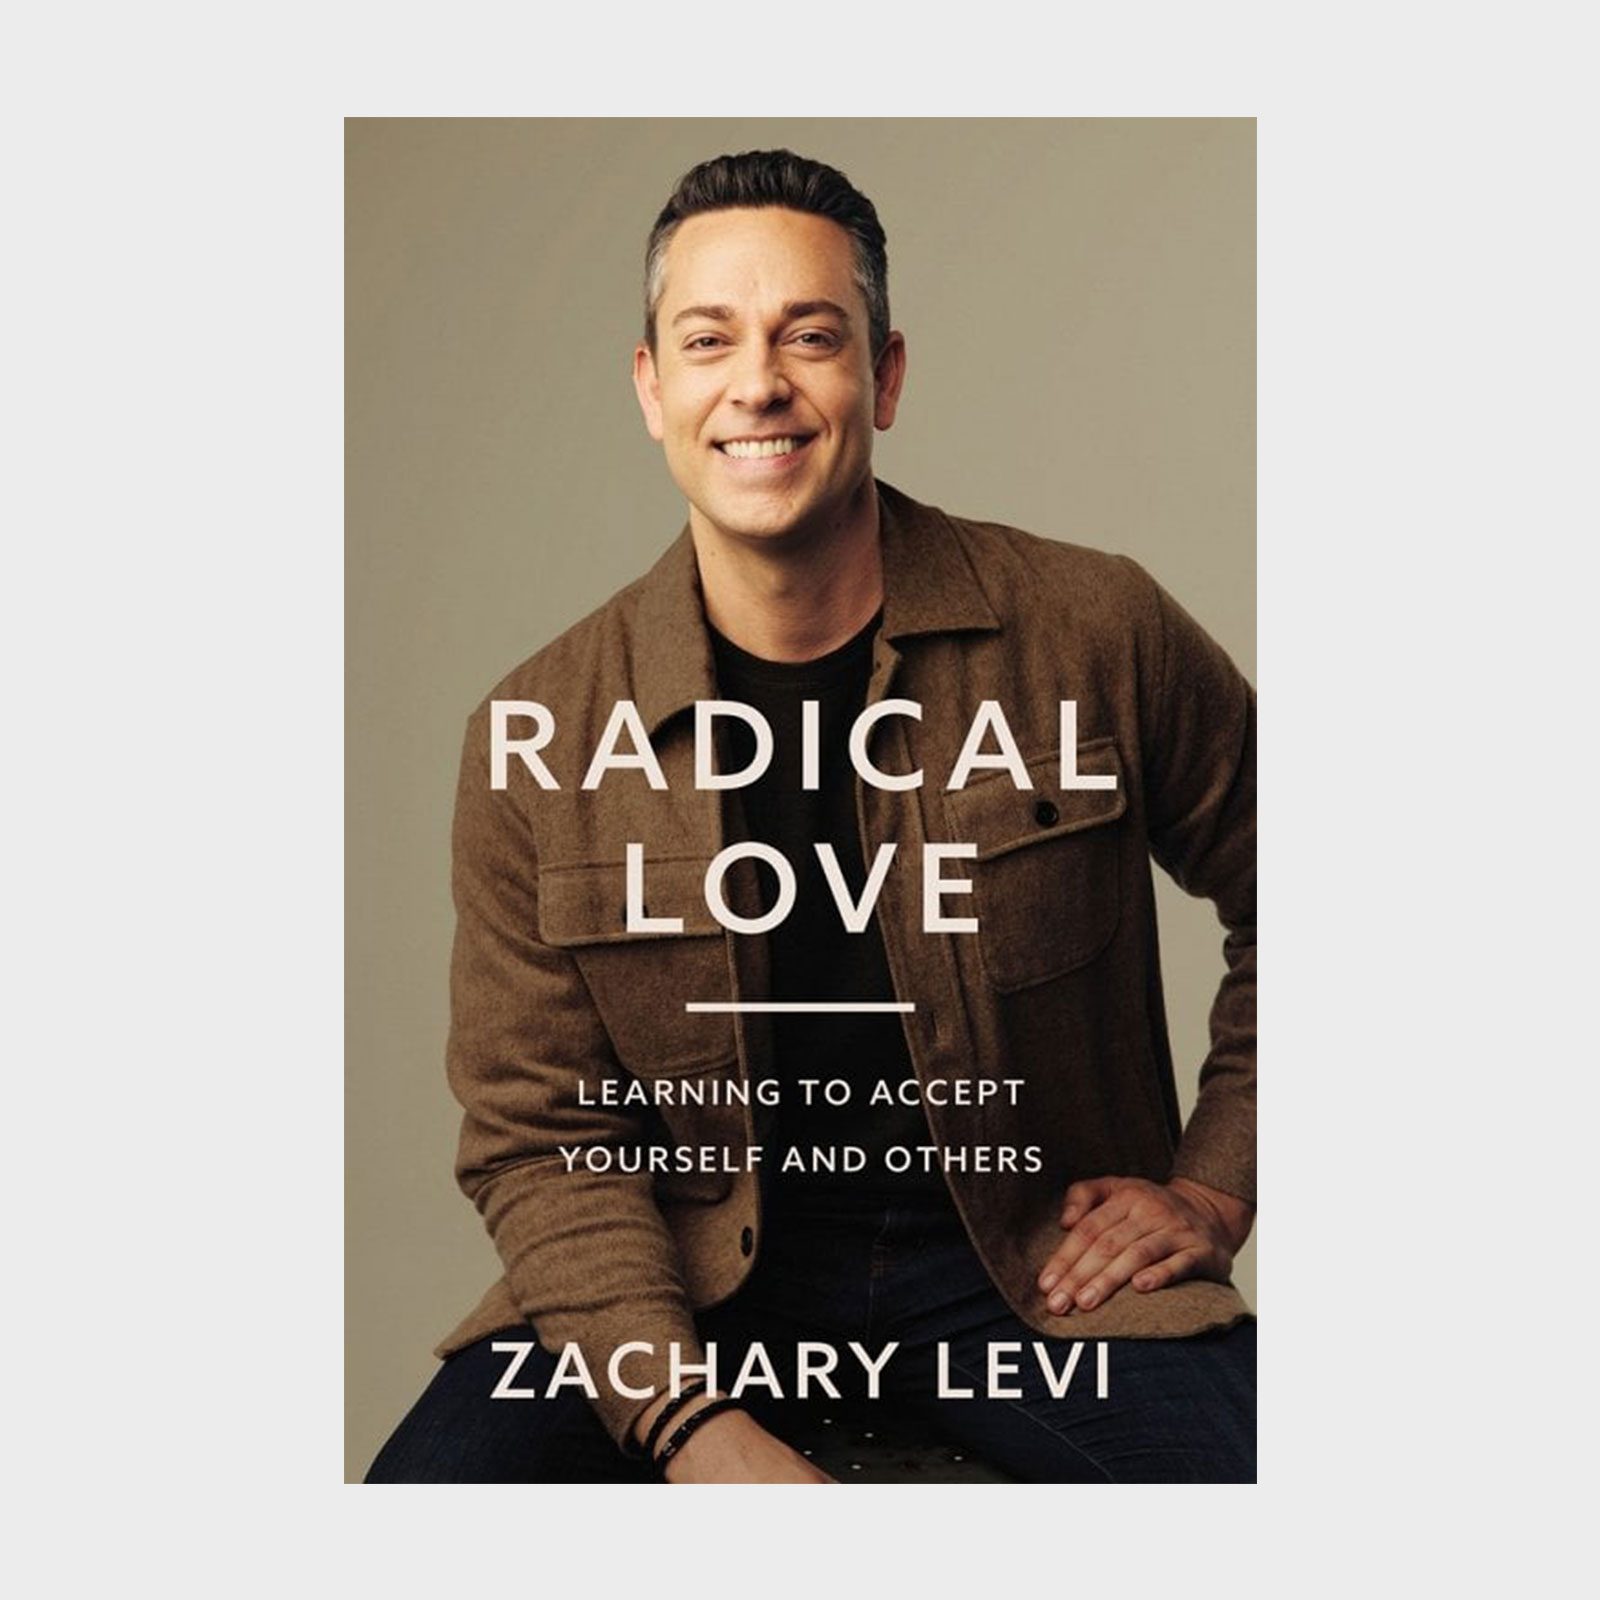 <p>The 2022 debut memoir by actor Zachary Levi, <em><a href="https://bookshop.org/p/books/radical-love-learning-to-accept-yourself-and-others-zachary-levi/17362547?ean=9780785236757" rel="noopener">Radical Love: Learning to Accept Yourself and Others</a> </em>is an honest portrayal of anxiety and depression that led to his rock bottom. With raw candor, Levi shares his emotional journey toward mental wellness and inspires readers to rise above their own trauma and pursue a life of <a href="https://www.rd.com/list/gratitude-quotes/" rel="noopener noreferrer">gratitude</a>.</p> <p class="listicle-page__cta-button-shop"><a class="shop-btn" href="https://bookshop.org/p/books/radical-love-learning-to-accept-yourself-and-others-zachary-levi/17362547?ean=9780785236757">Shop Now</a></p>